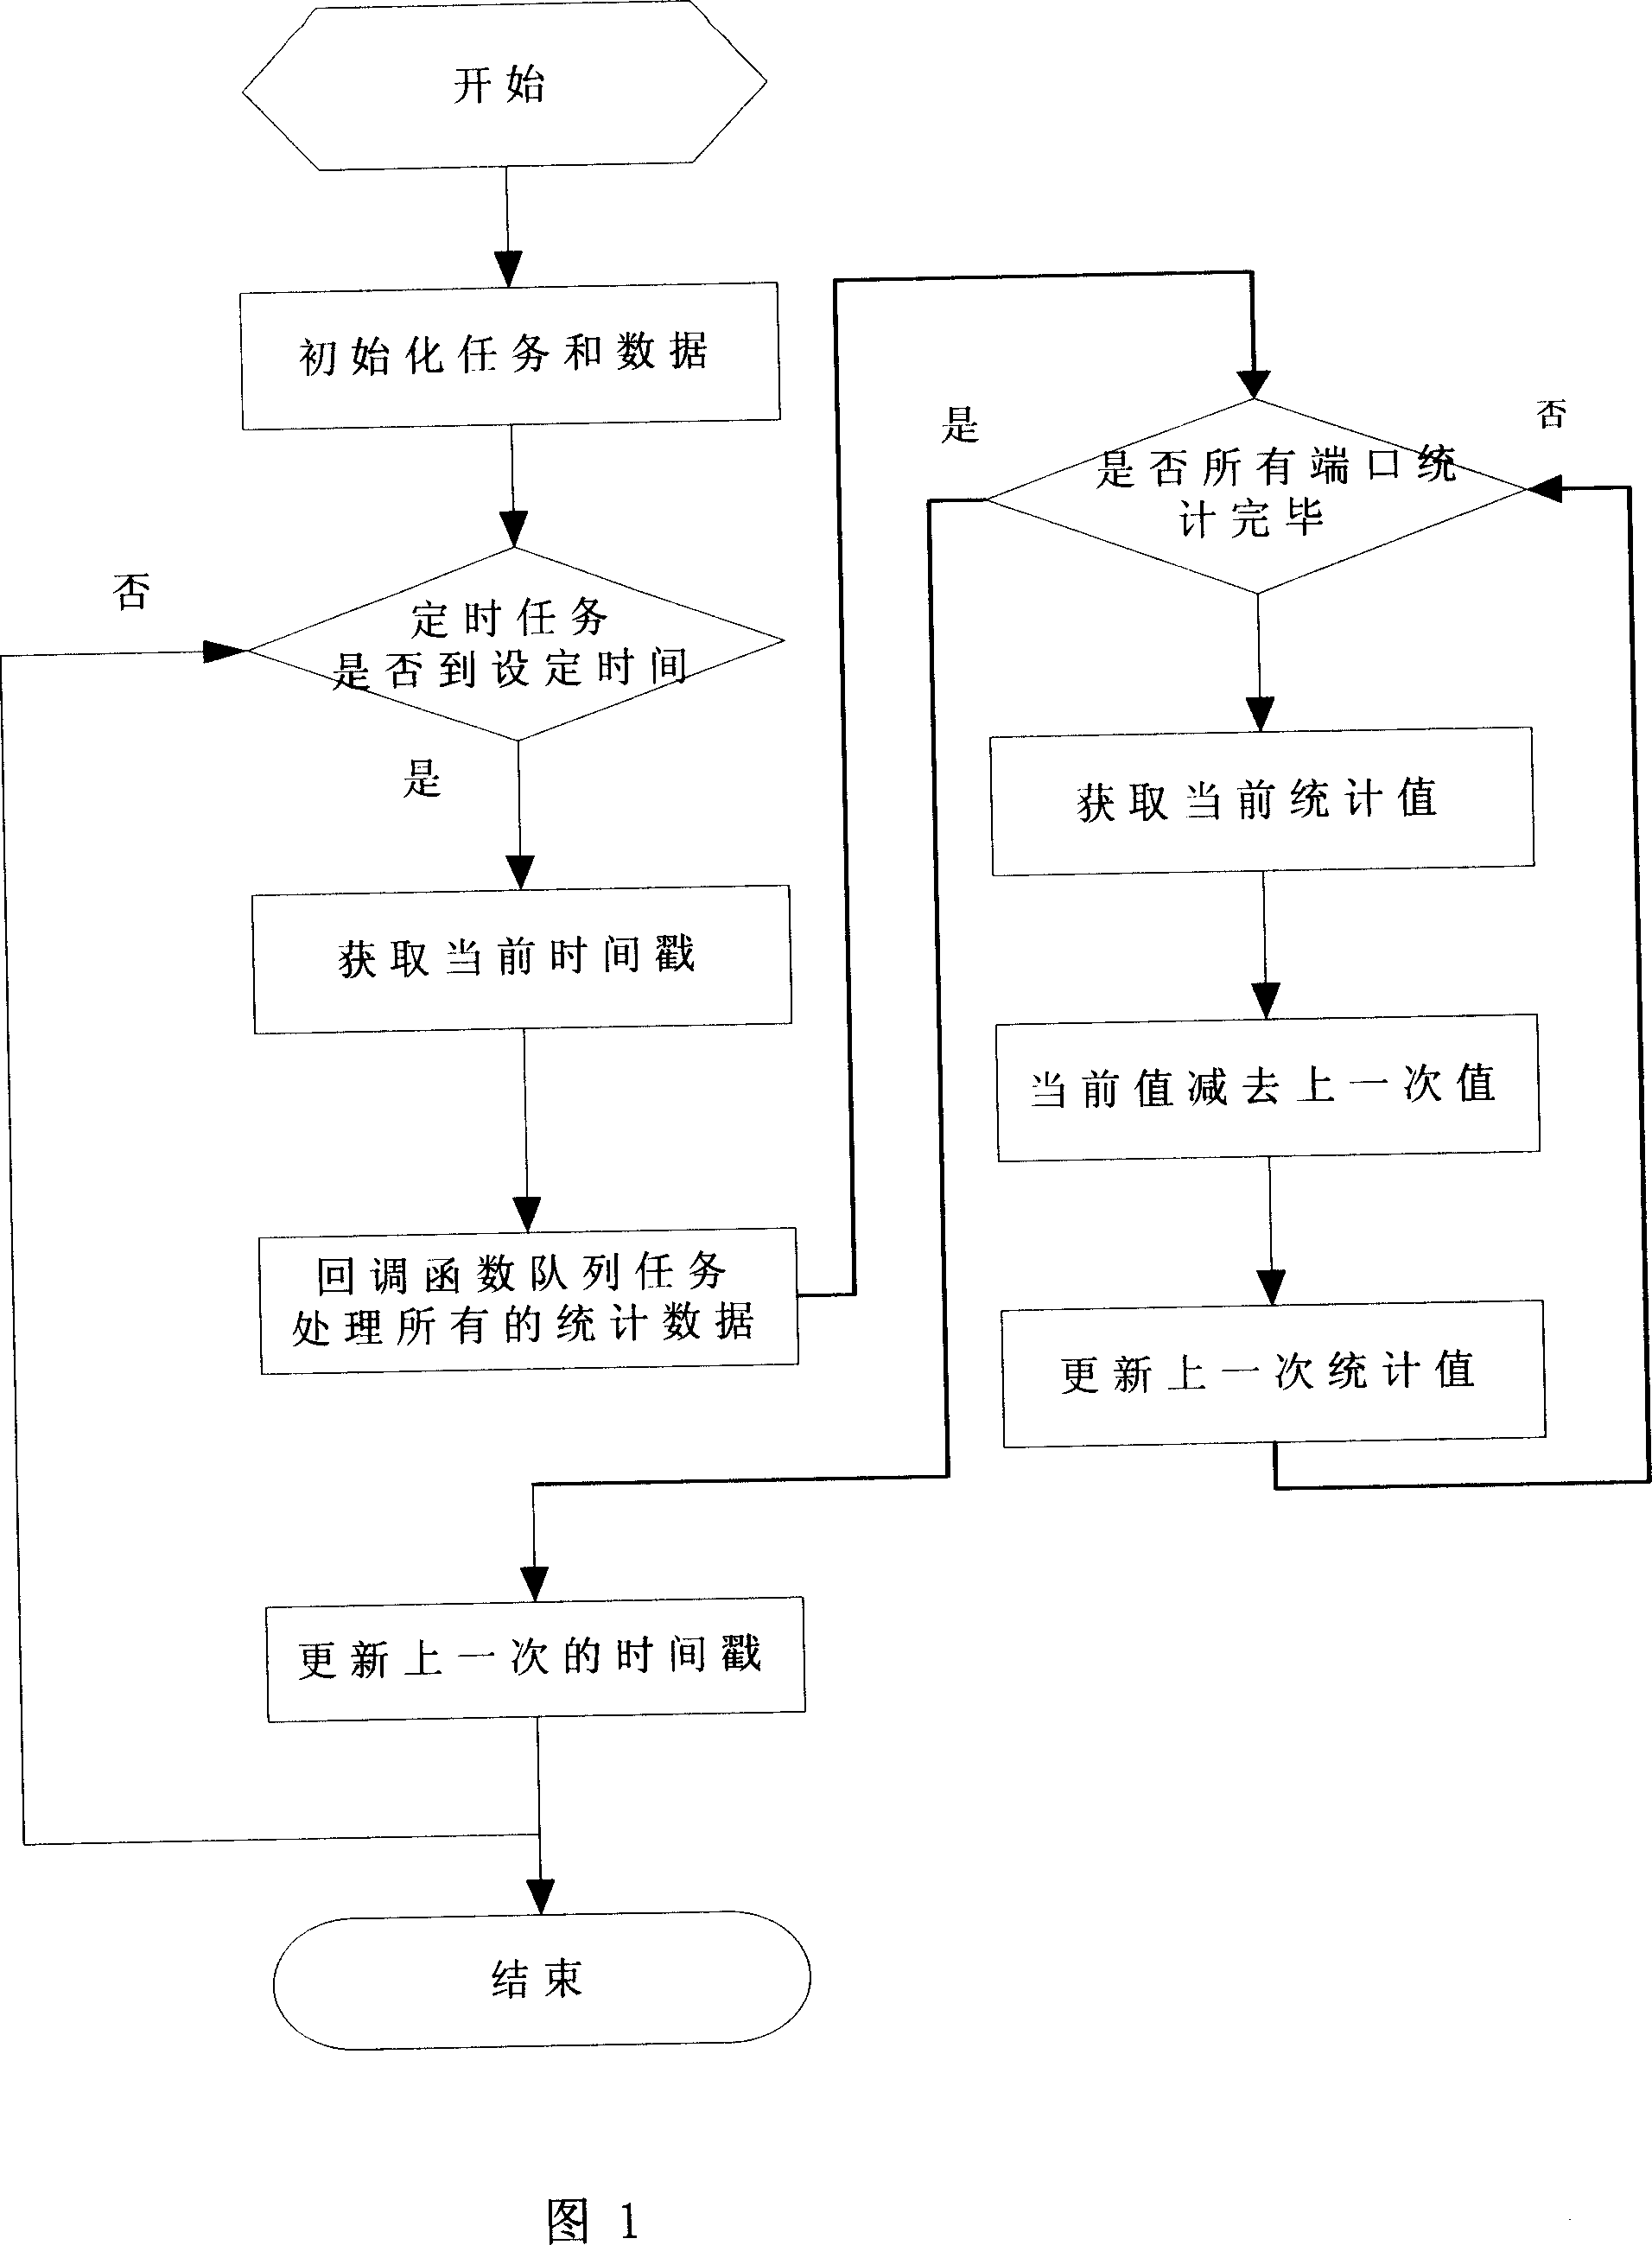 Network flux statistical method for broad band and narrow band integrated access equipment